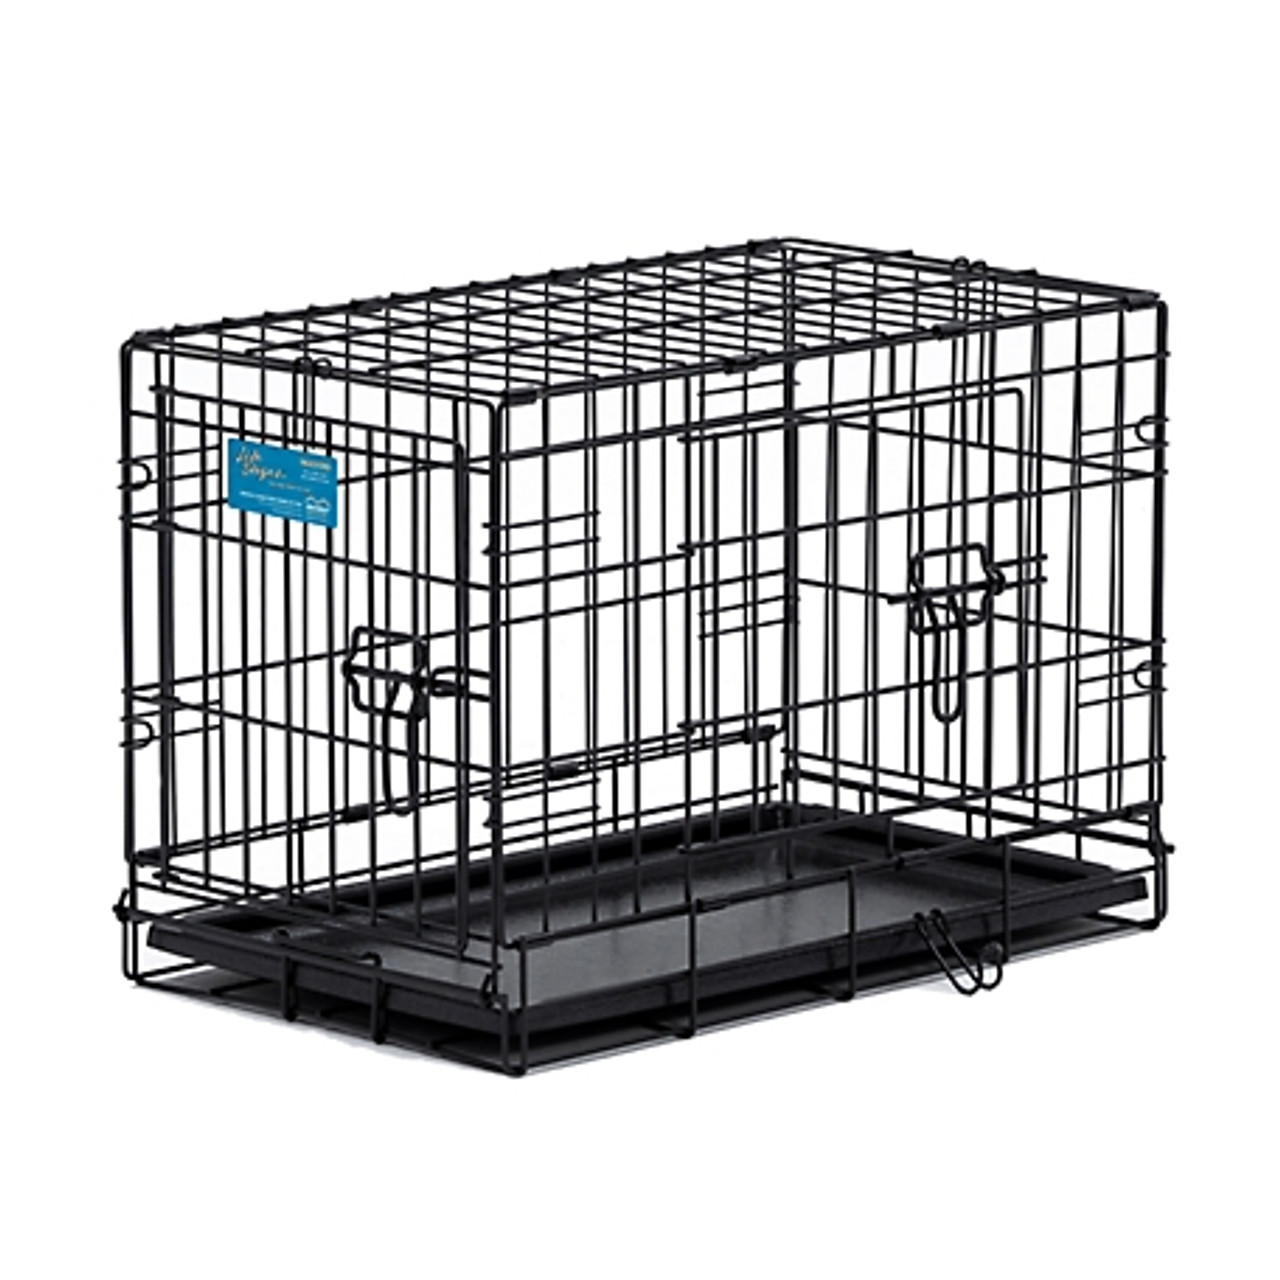 MidWest Newly Enhanced Folding Metal Toy Dog Crate with Divider